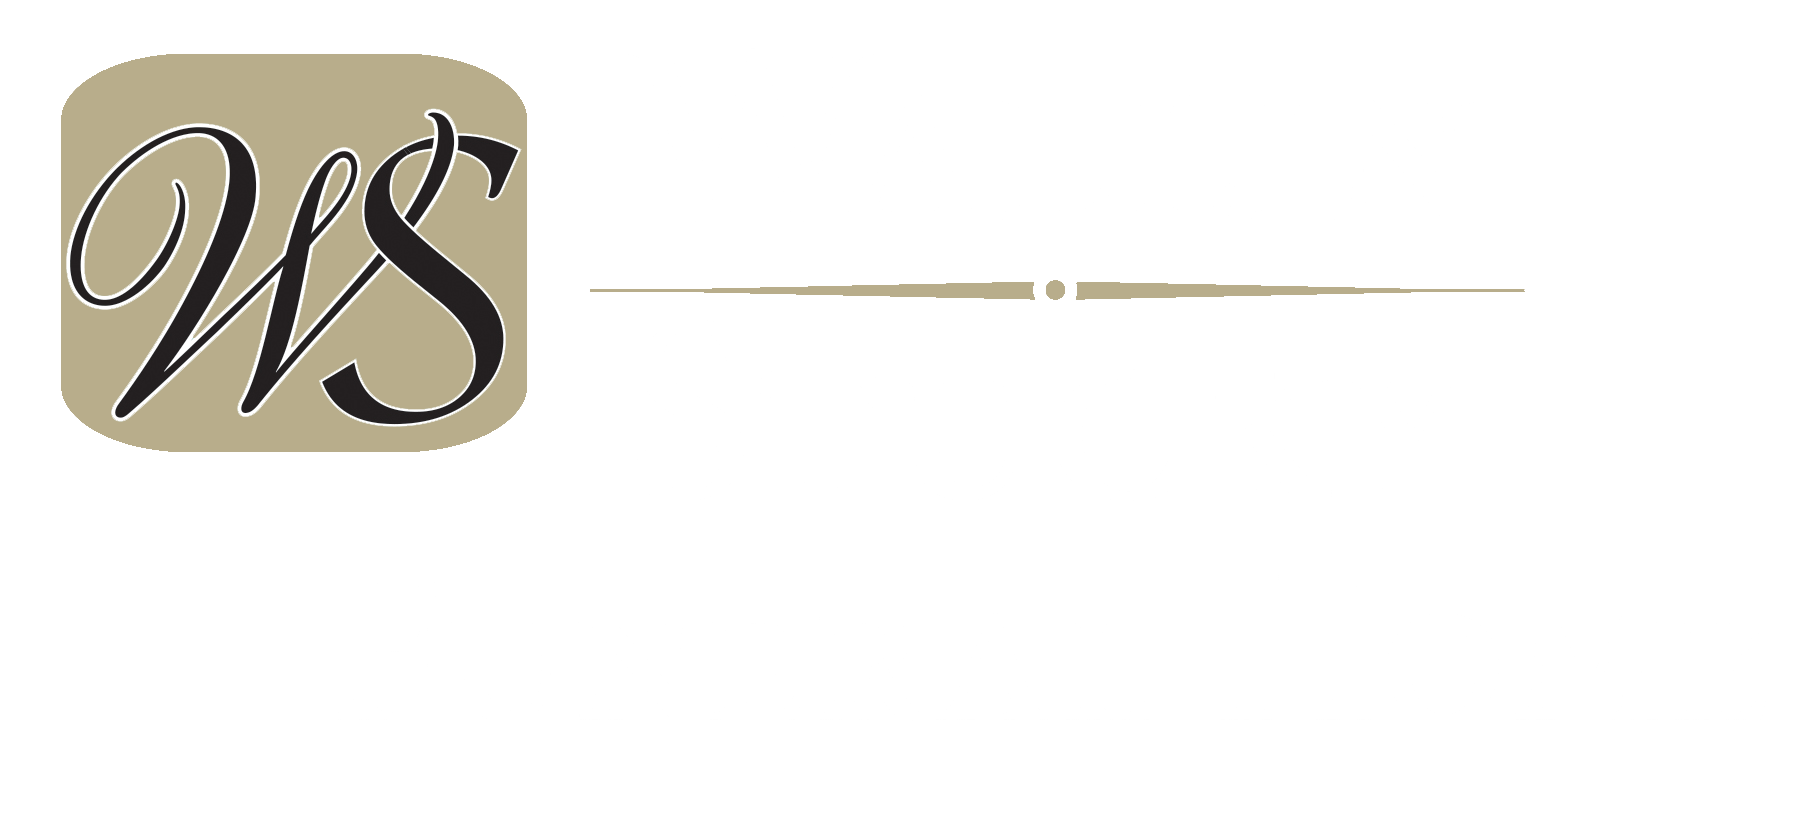 Wallin Funeral Home & Cremation, LLC.